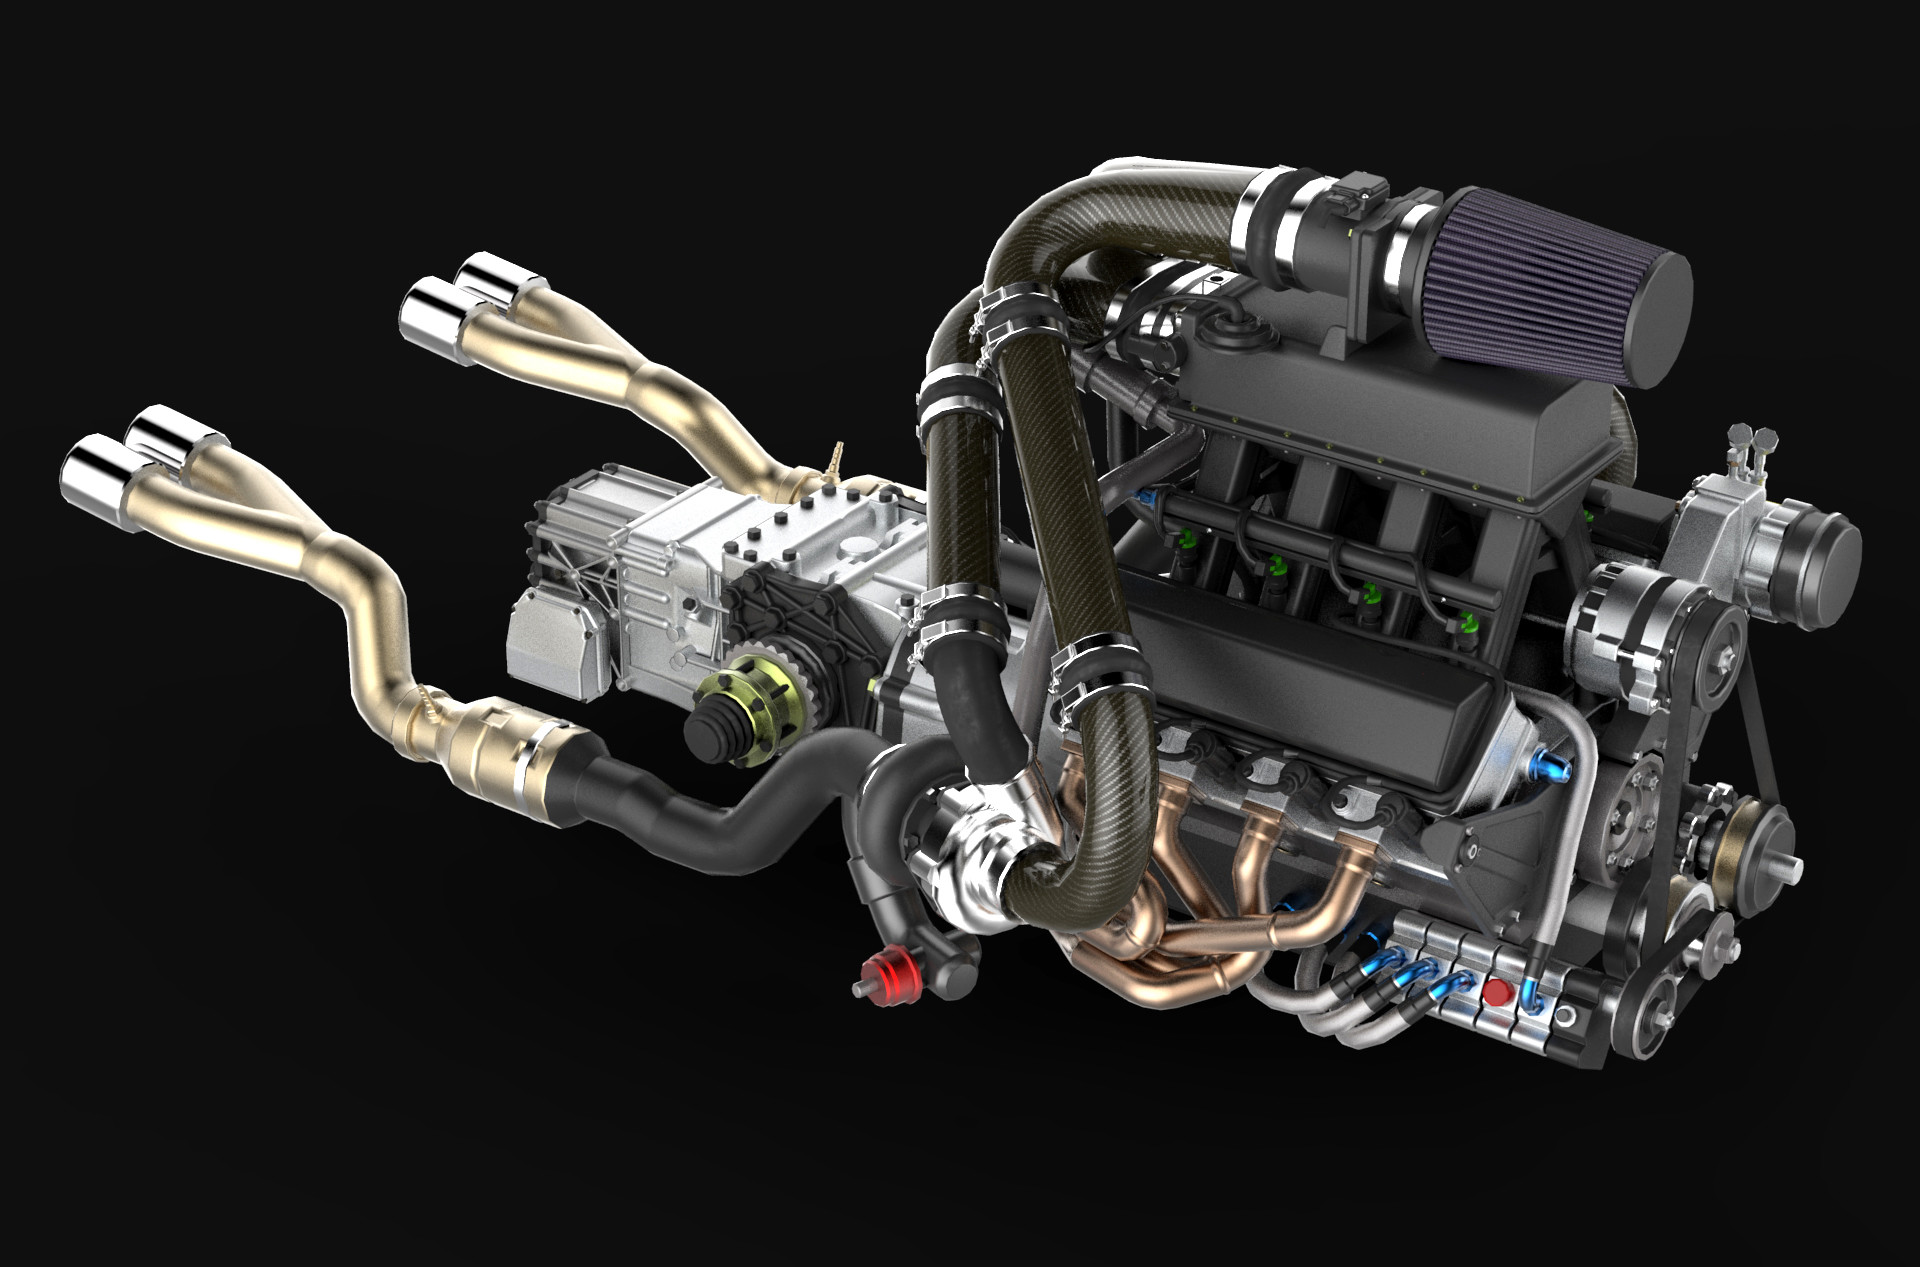 I've modeled this Saleen S7 Twin Turbo's engine and mechanical pa...